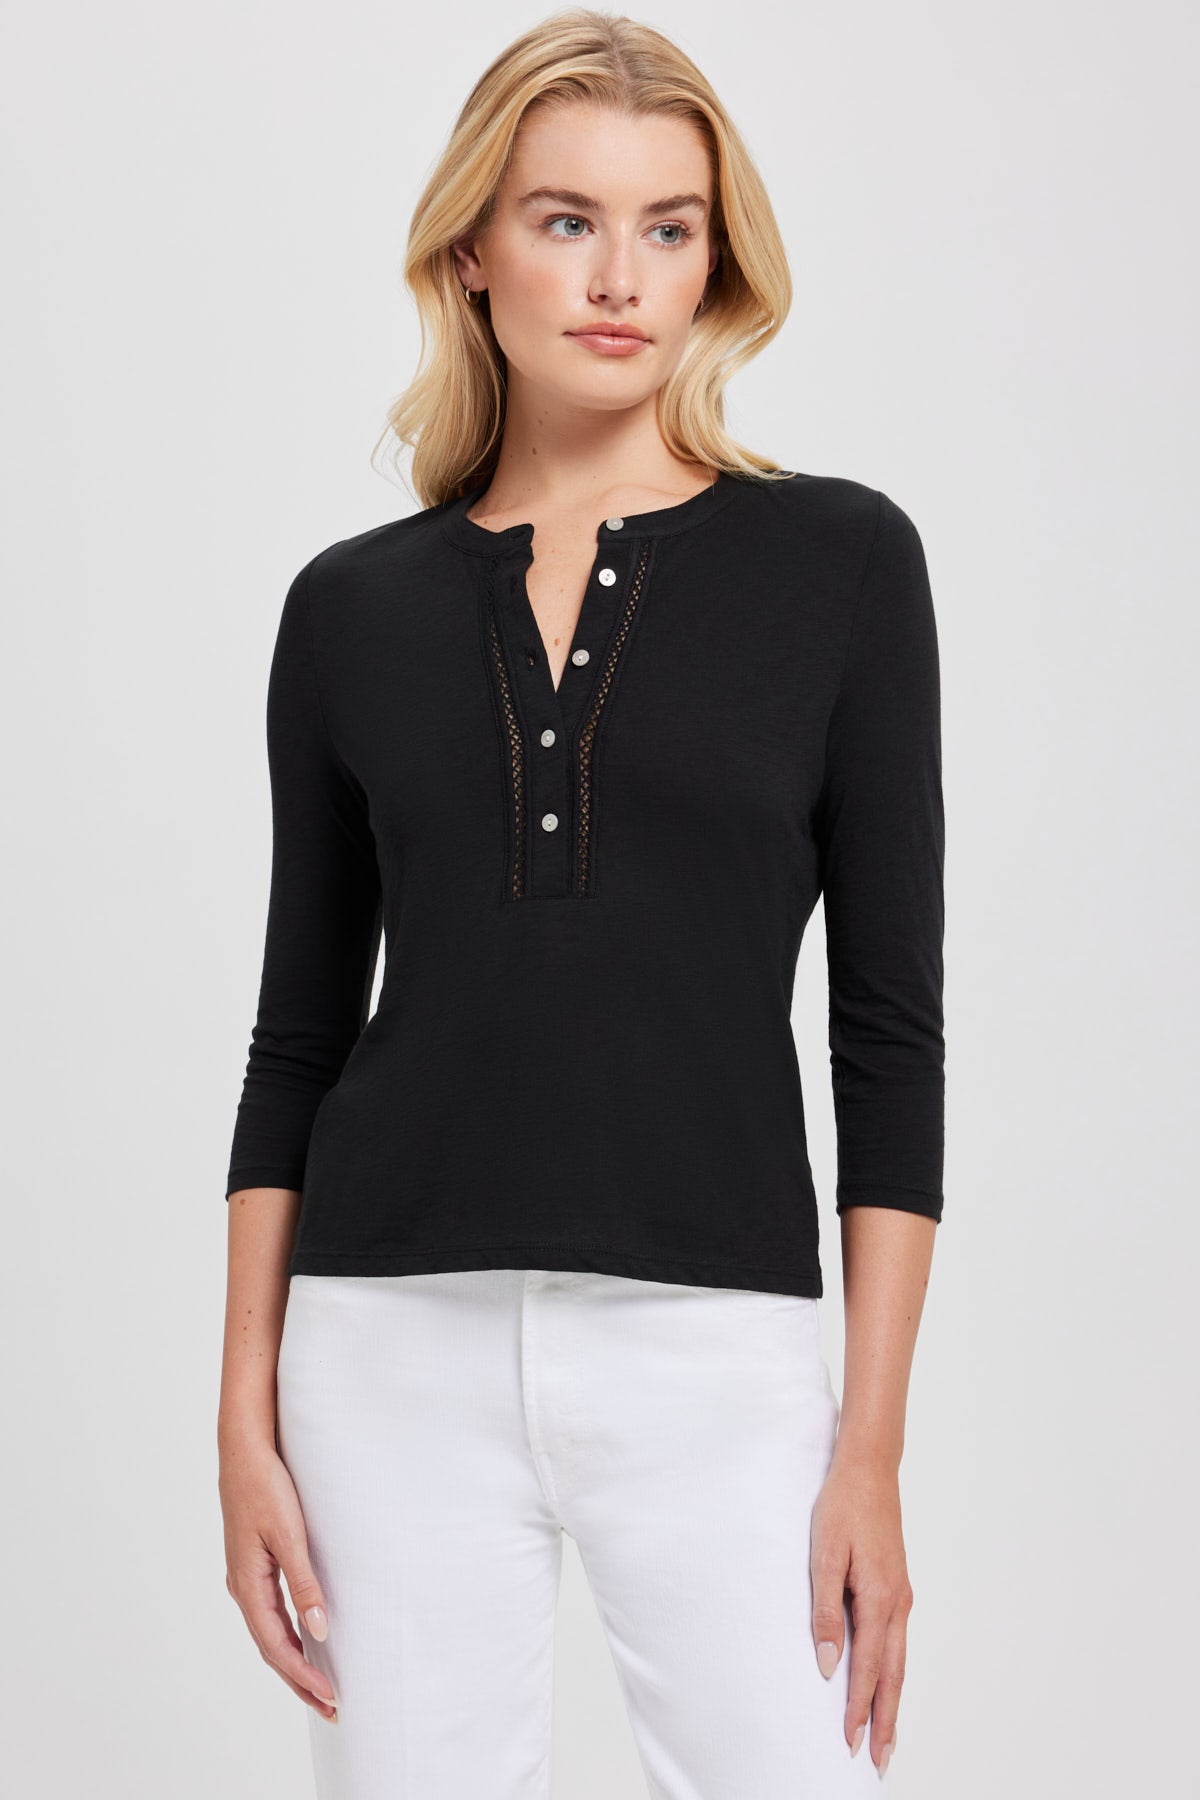 Honor Embroidered Henley - Goldie LeWinter